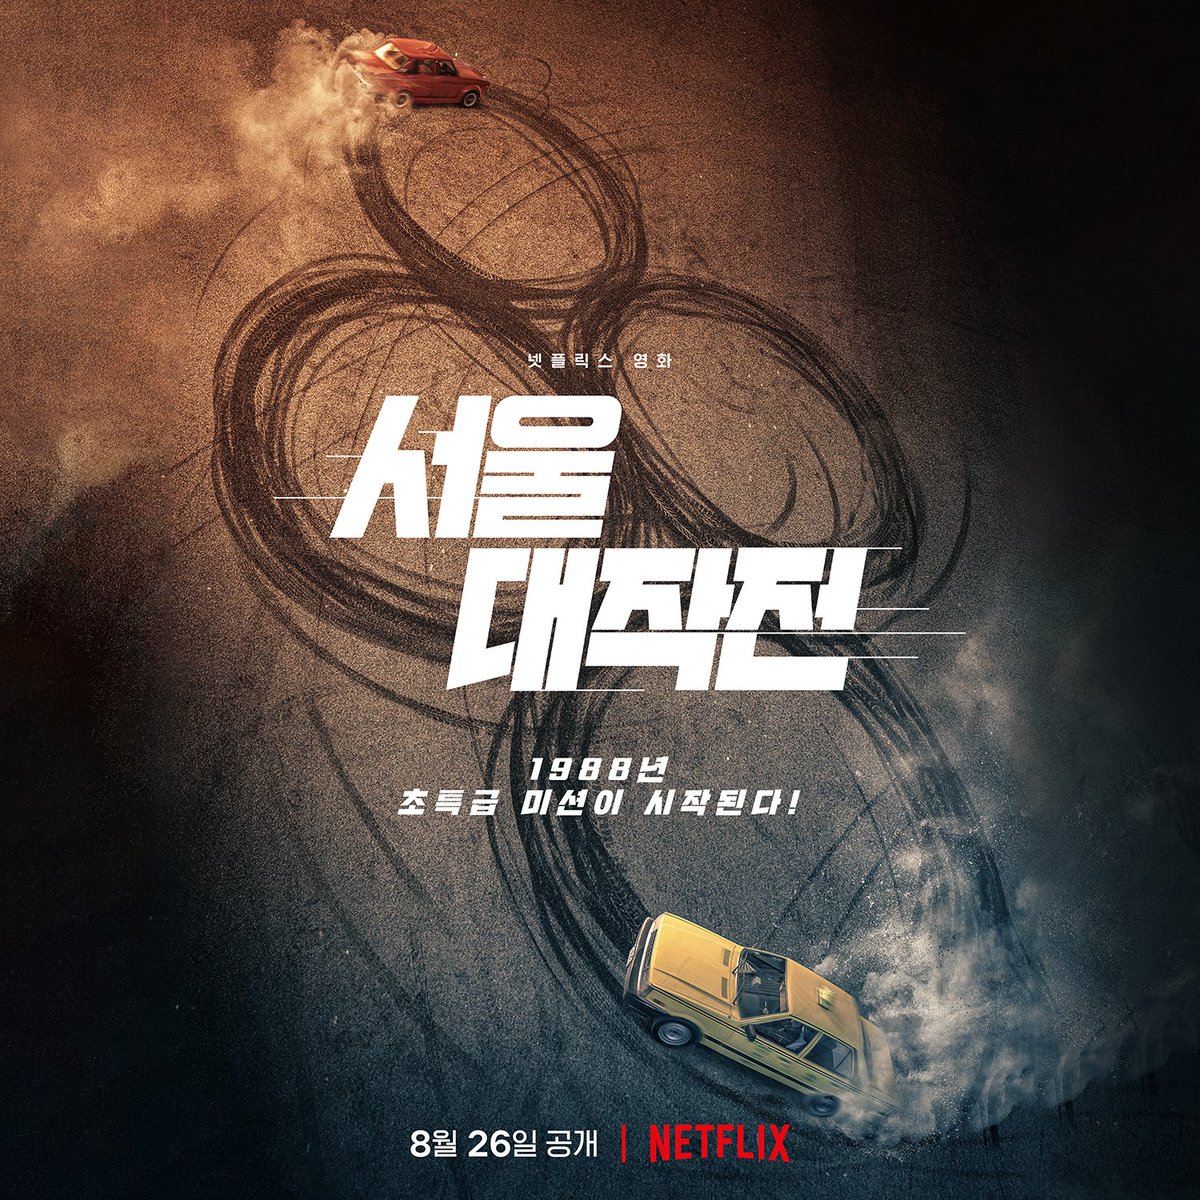 Netflix film #SeoulVibe releases its teaser poster, it is confirmed to premiere on August 26!

Main casts: #YooAhIn #GoKyungPyo #LeeKyuHyung #ParkJuhyun #OngSeongWu #KimSungKyun #JungWoongIn & #MoonSori